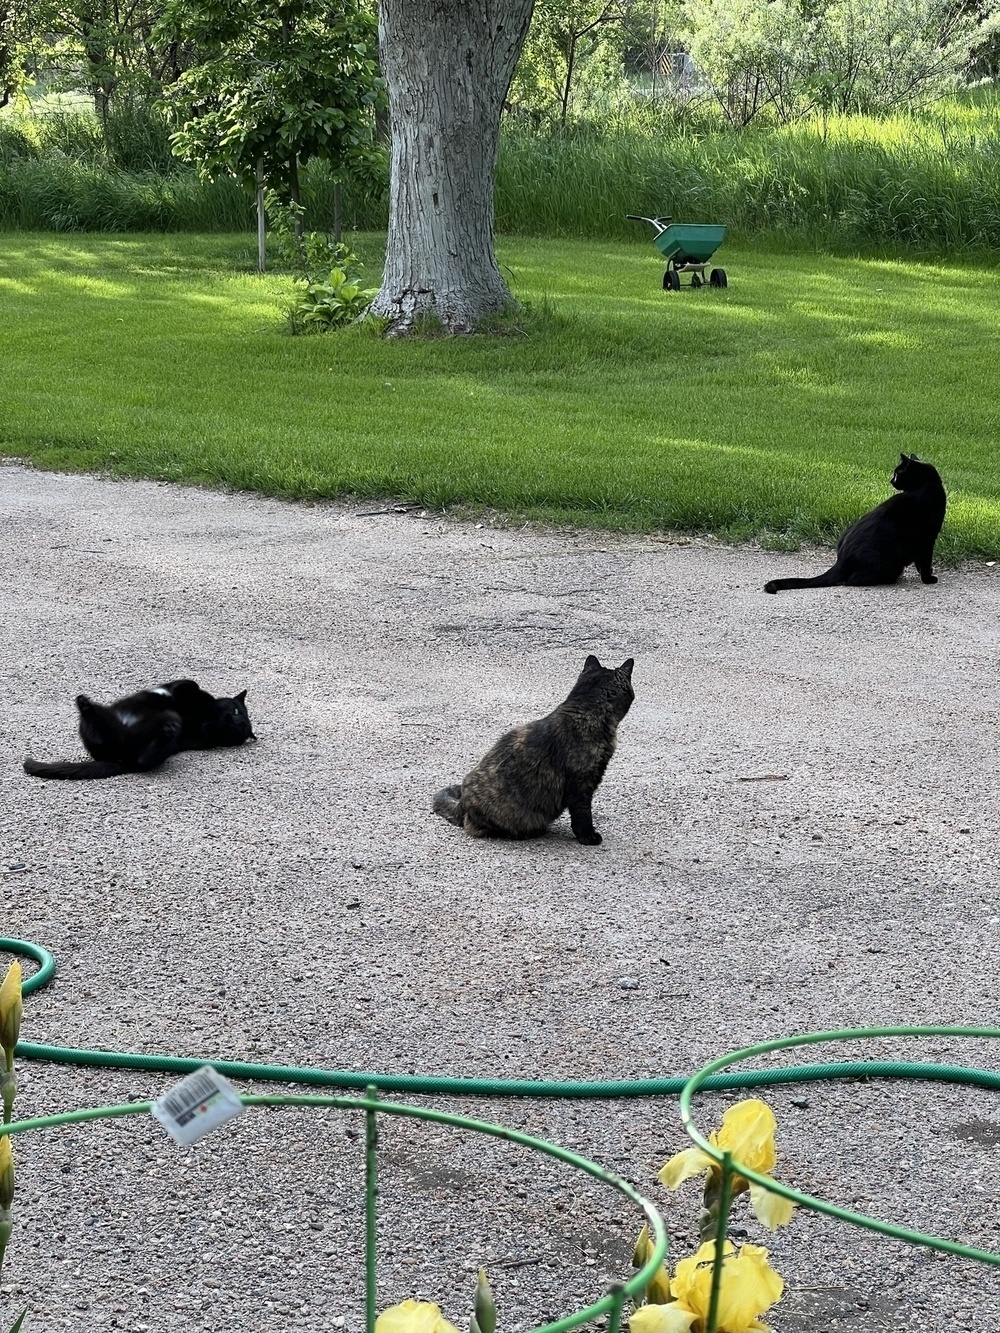 Three cats, two black and one tortoiseshell, sit and lounge on a gravel path with a grassy area, tree, and garden cart in the background.